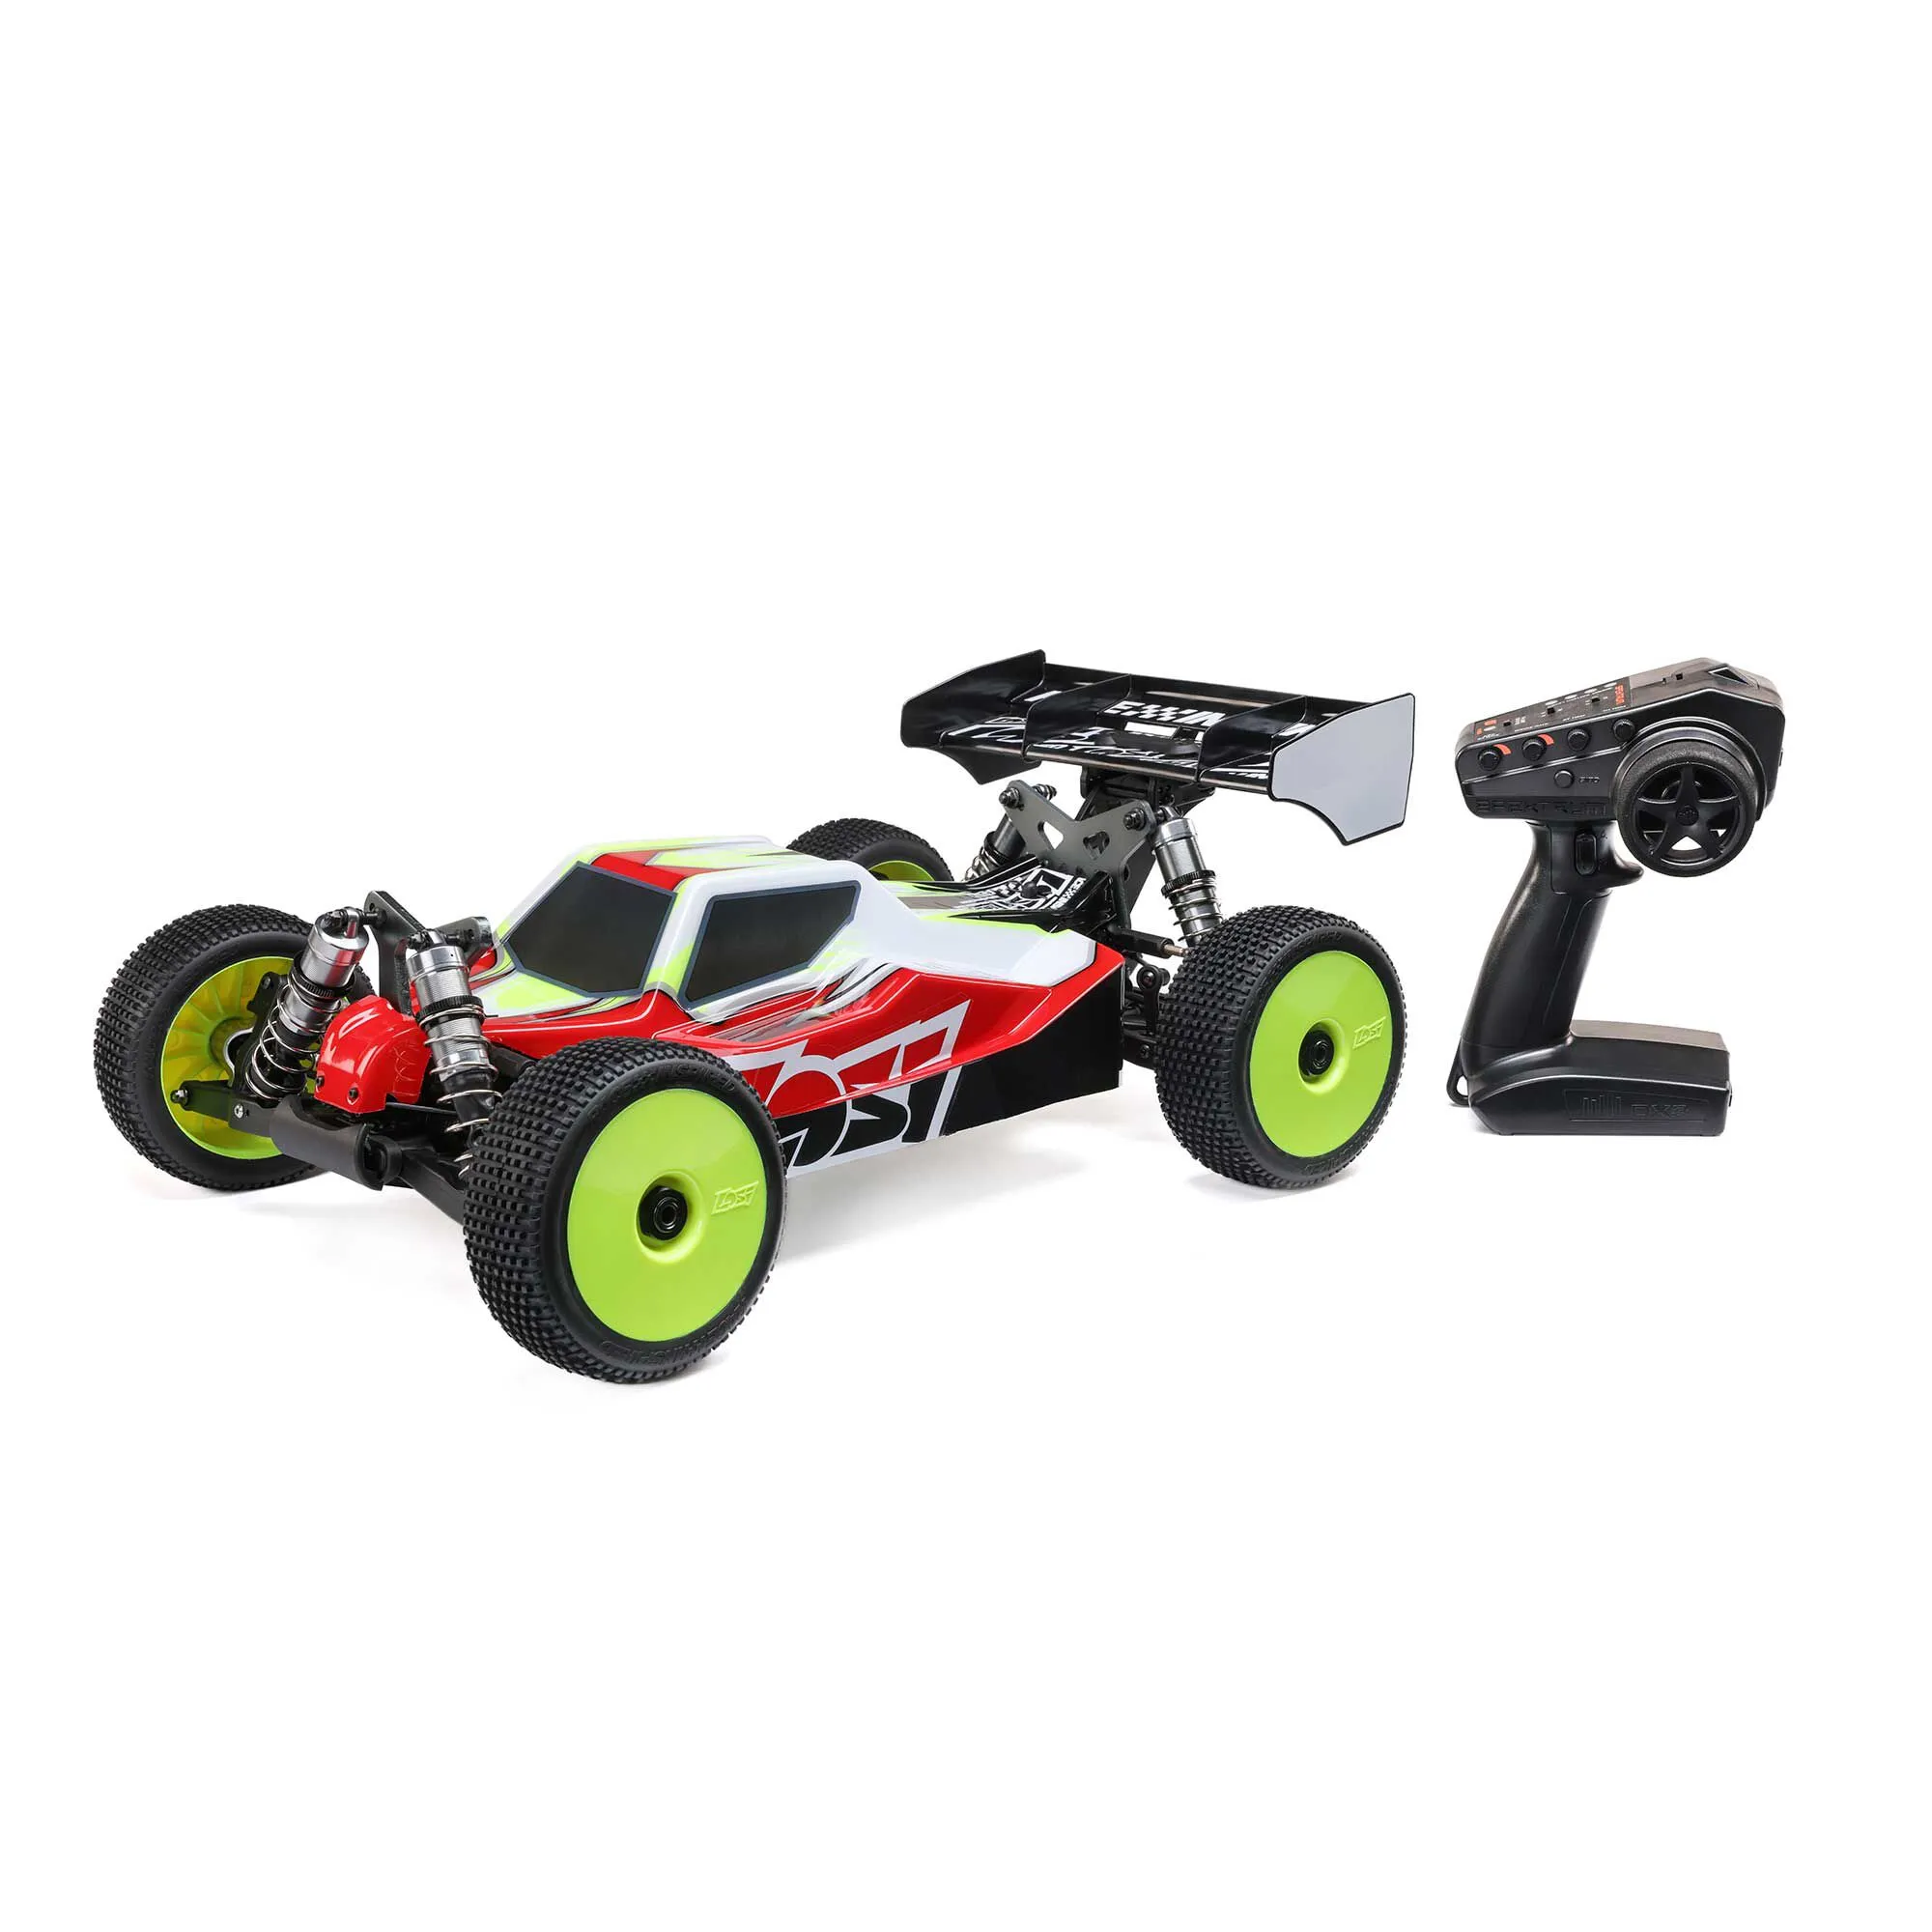 Losi 8ight-XE 1/8 Electric Racing Buggy, RTR, LOS04018